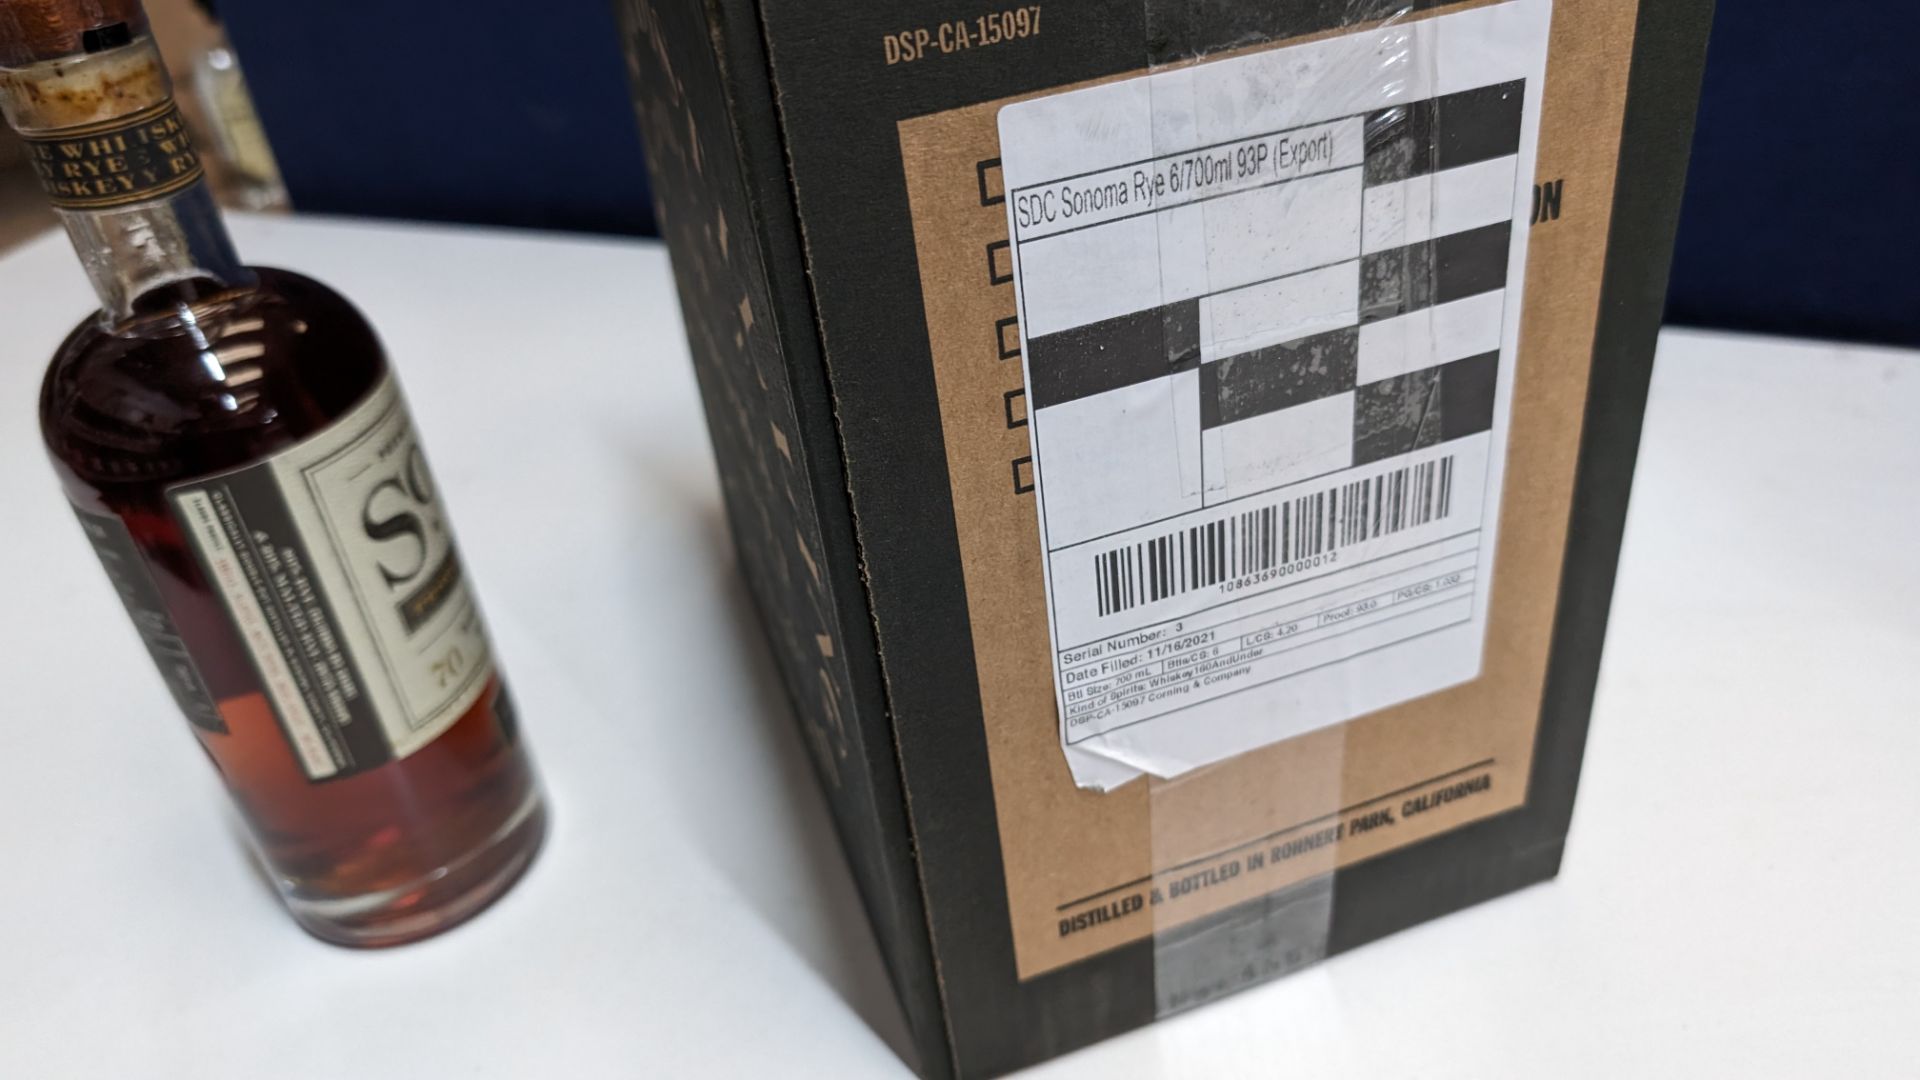 6 off 700ml bottles of Sonoma Rye Whiskey. In Sonoma branded box which includes bottling details on - Image 7 of 7